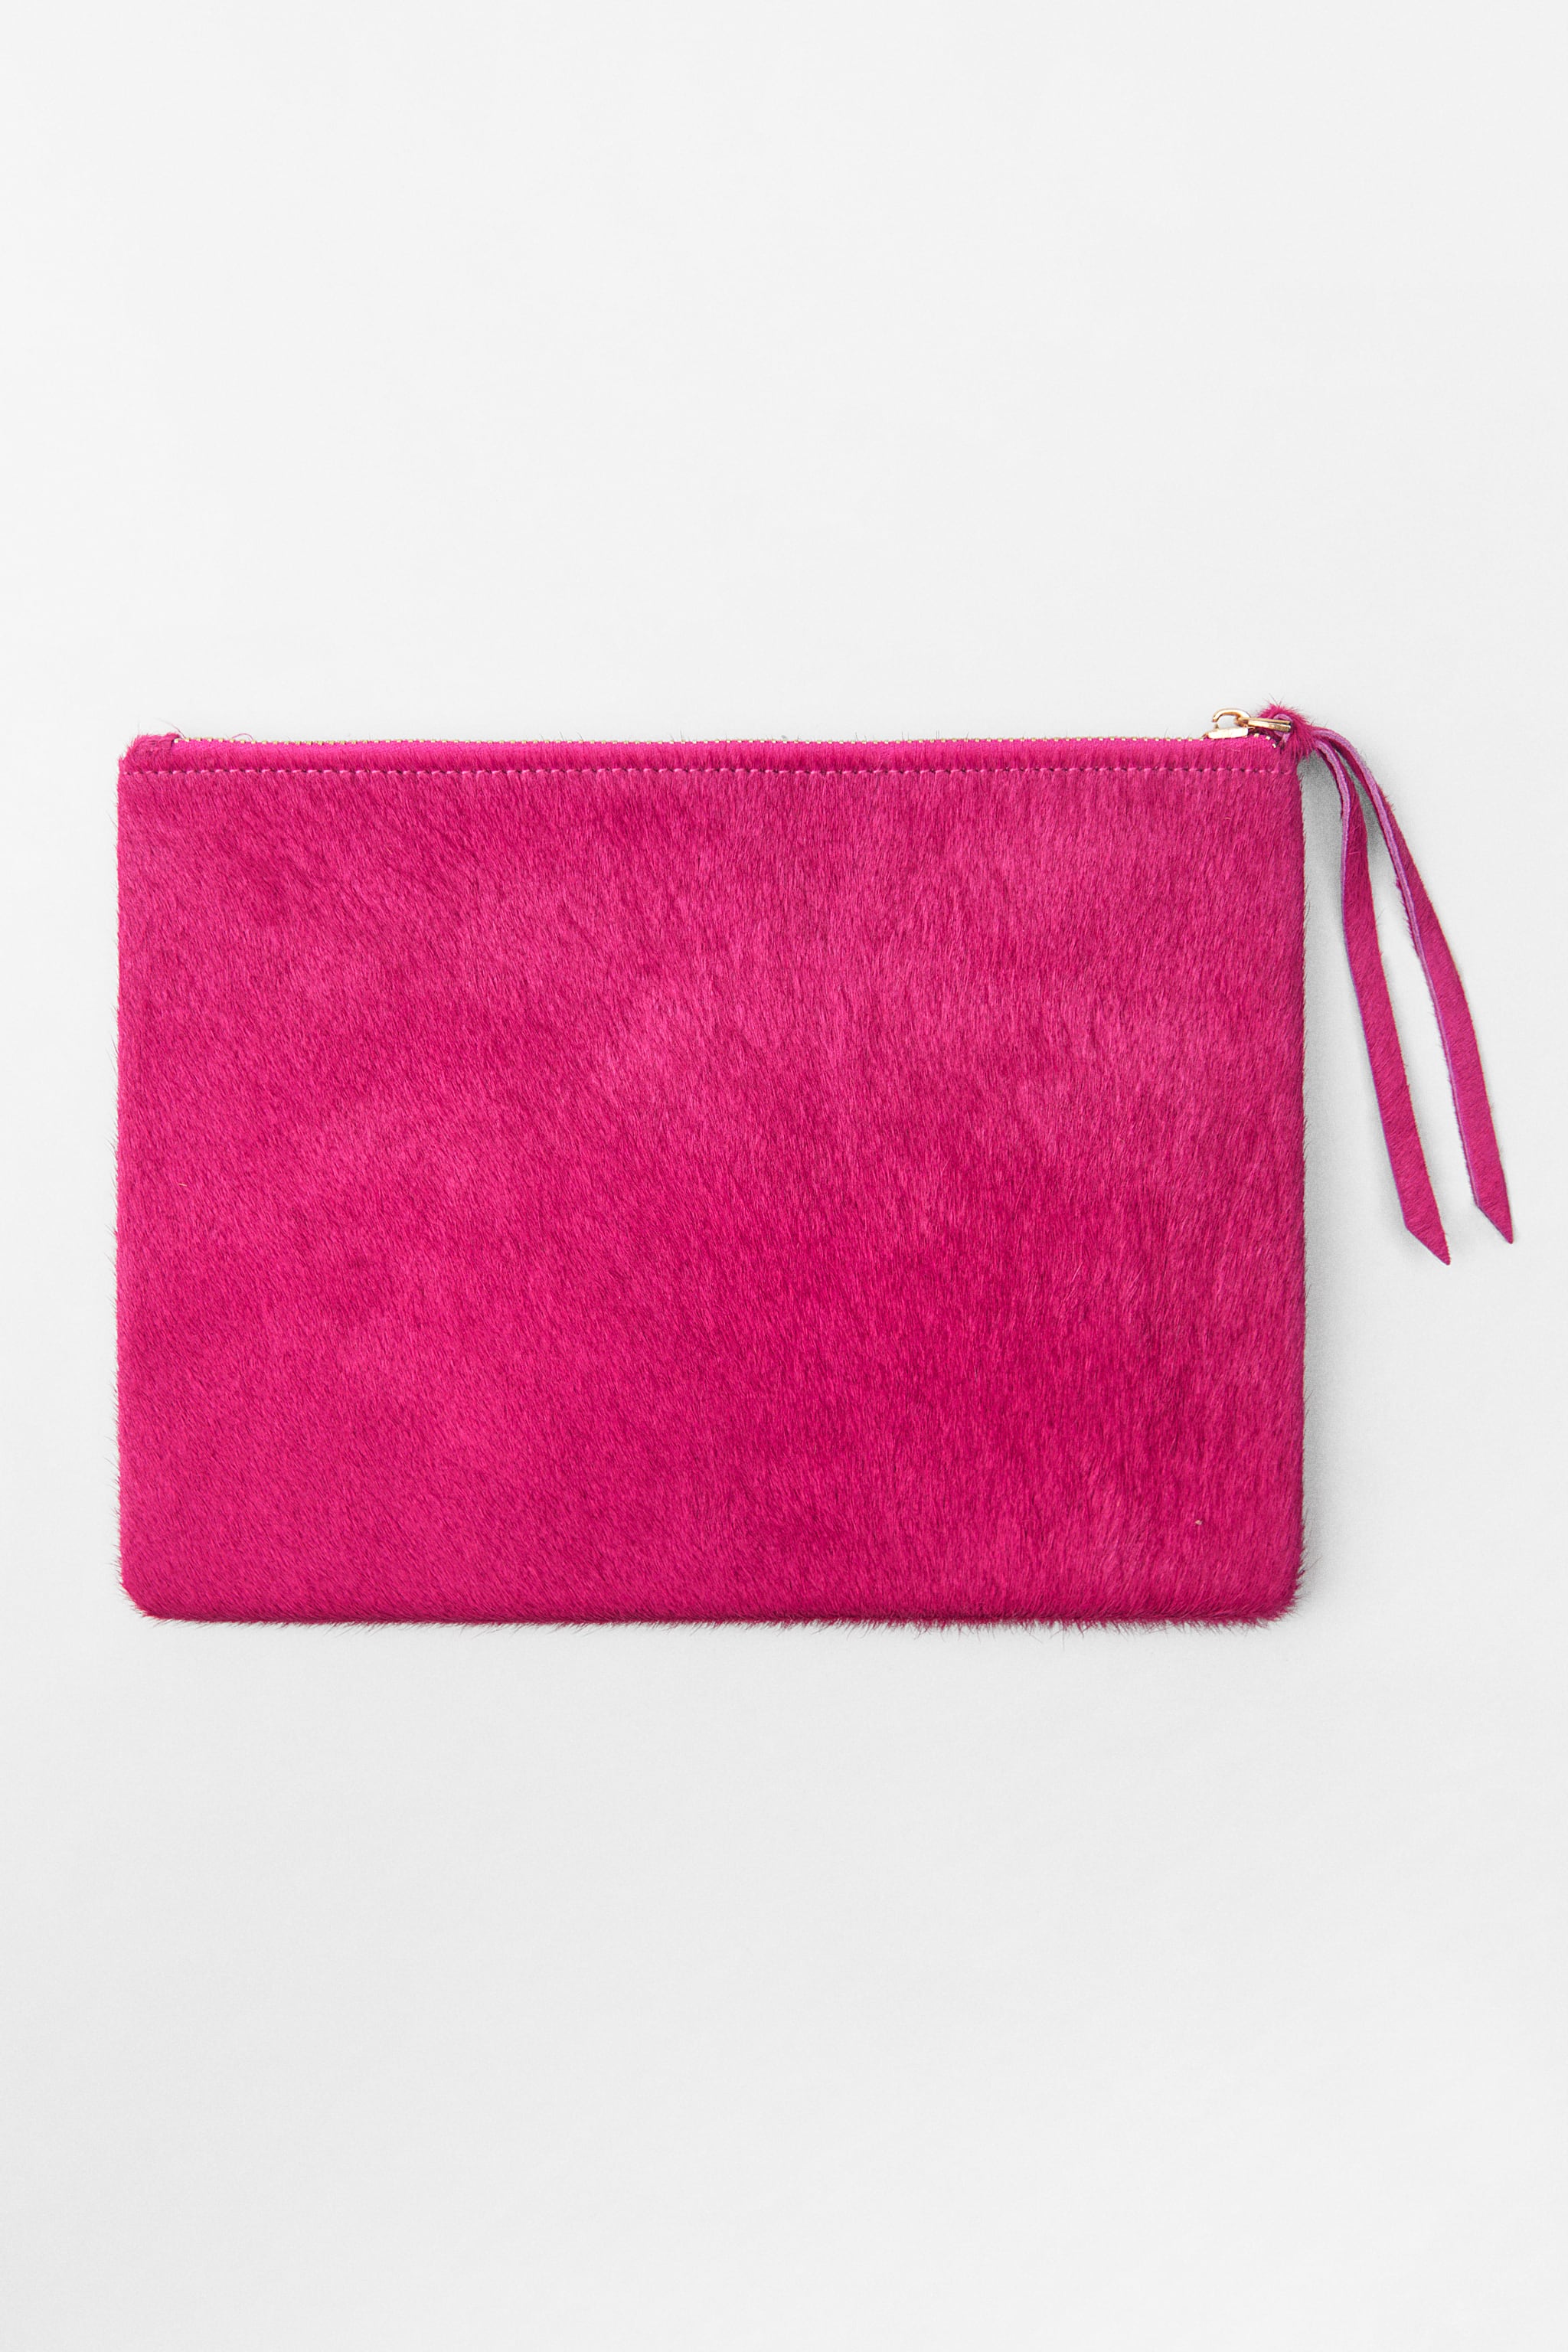 FURSKIN LEATHER POUCH